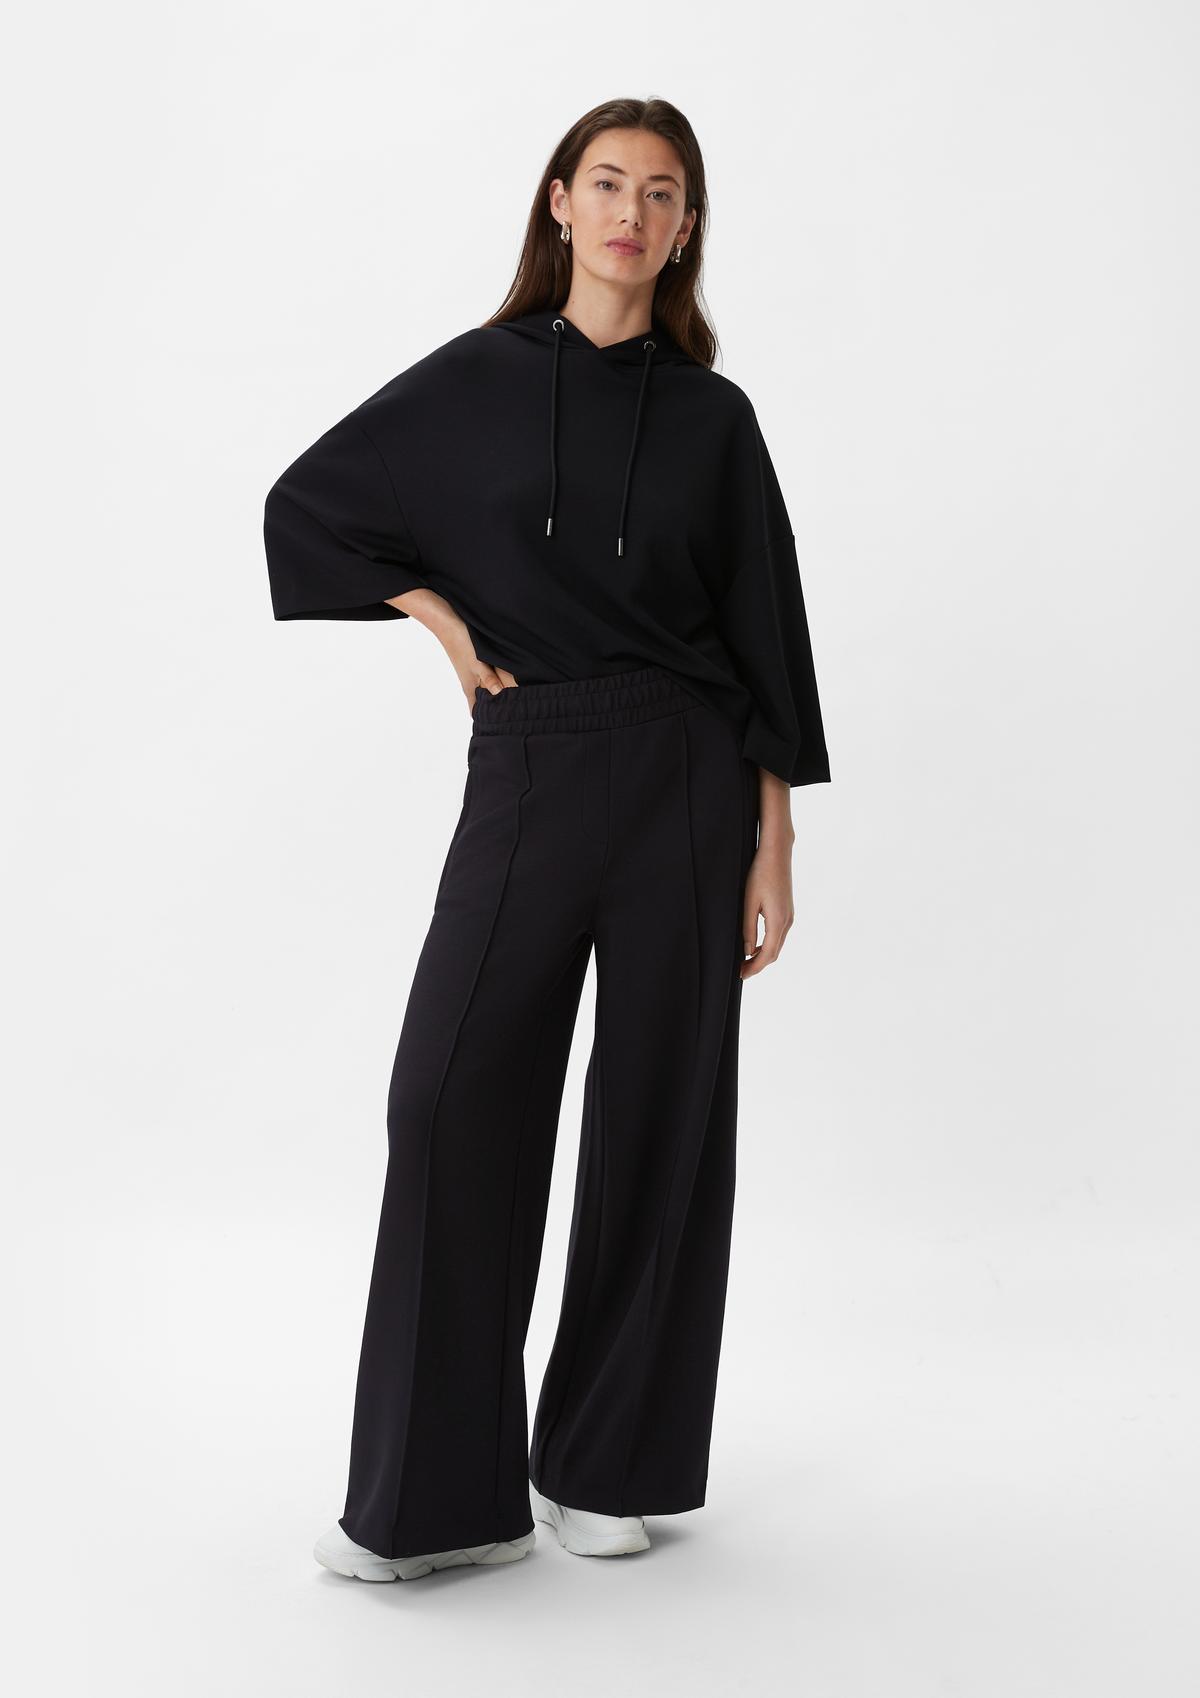 Tracksuit culottes in a modal blend